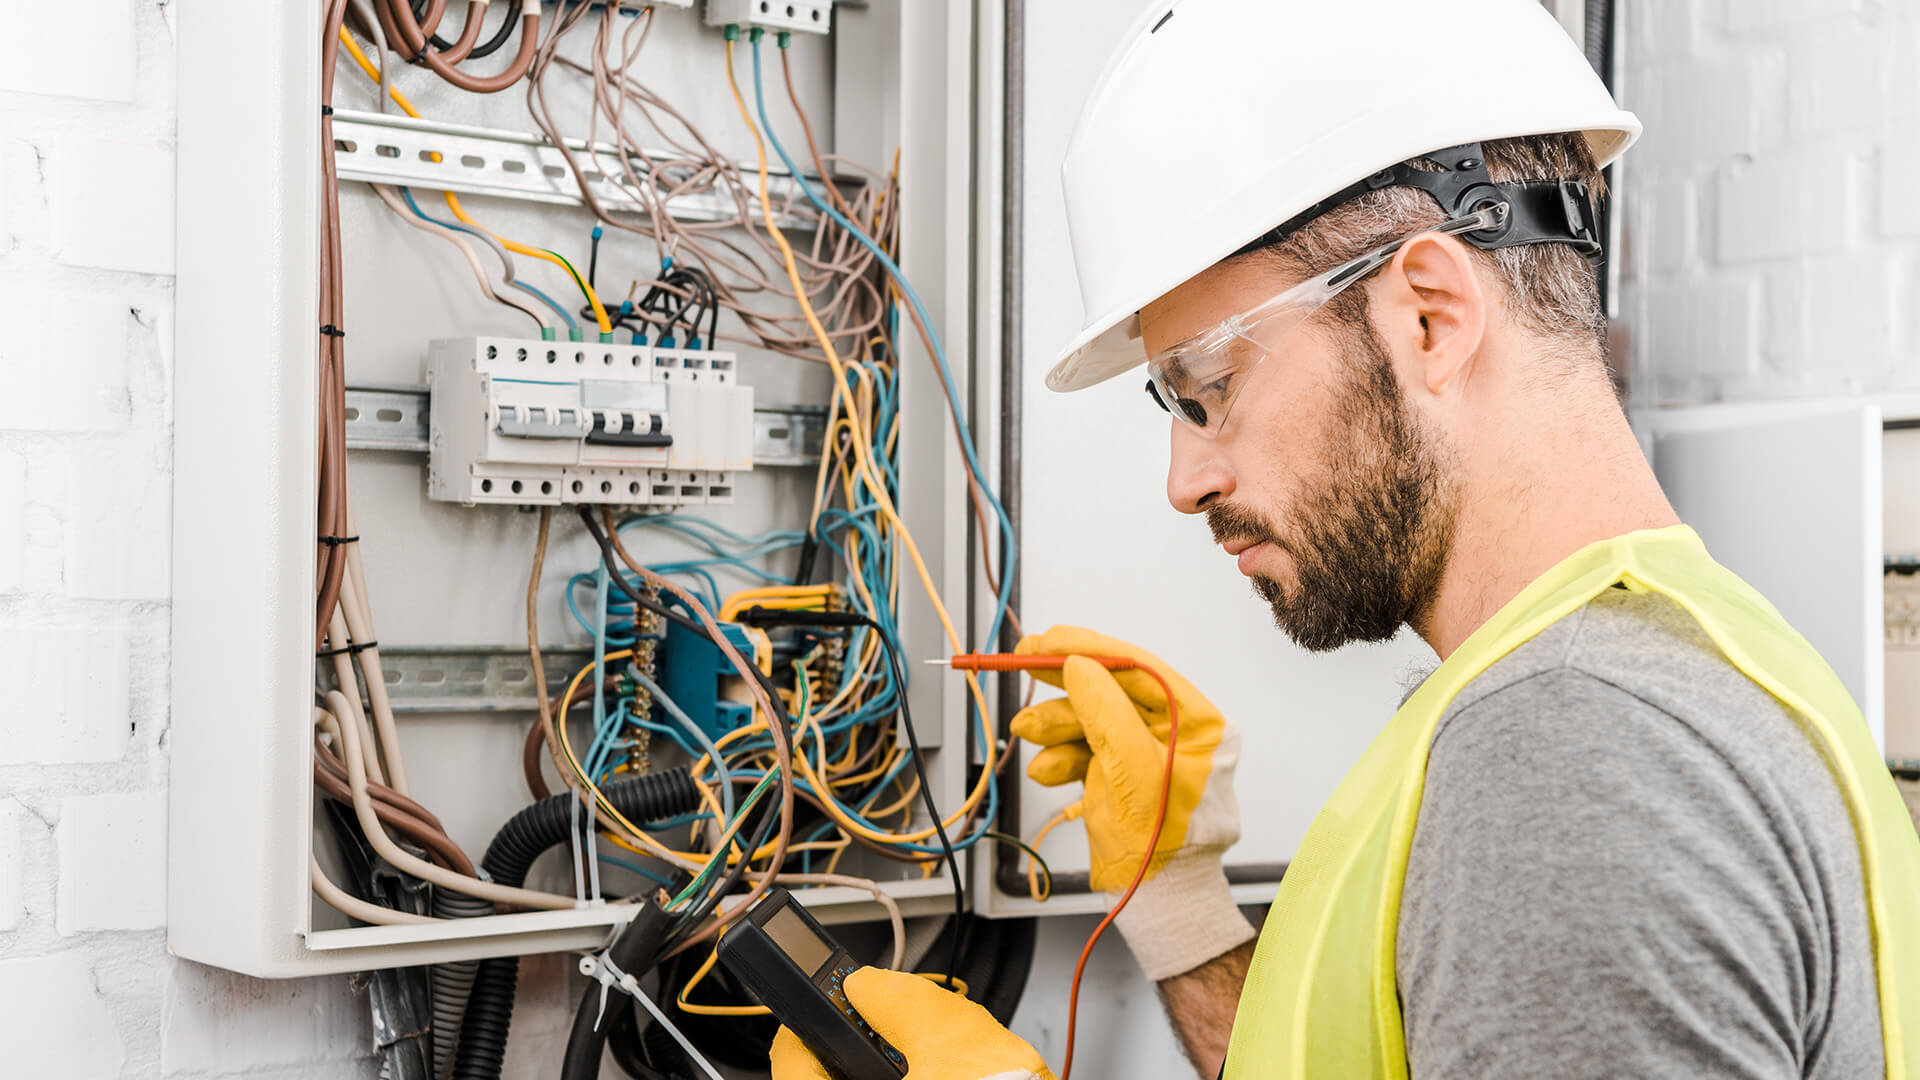 About the Electrical Service at Commercial Buildings